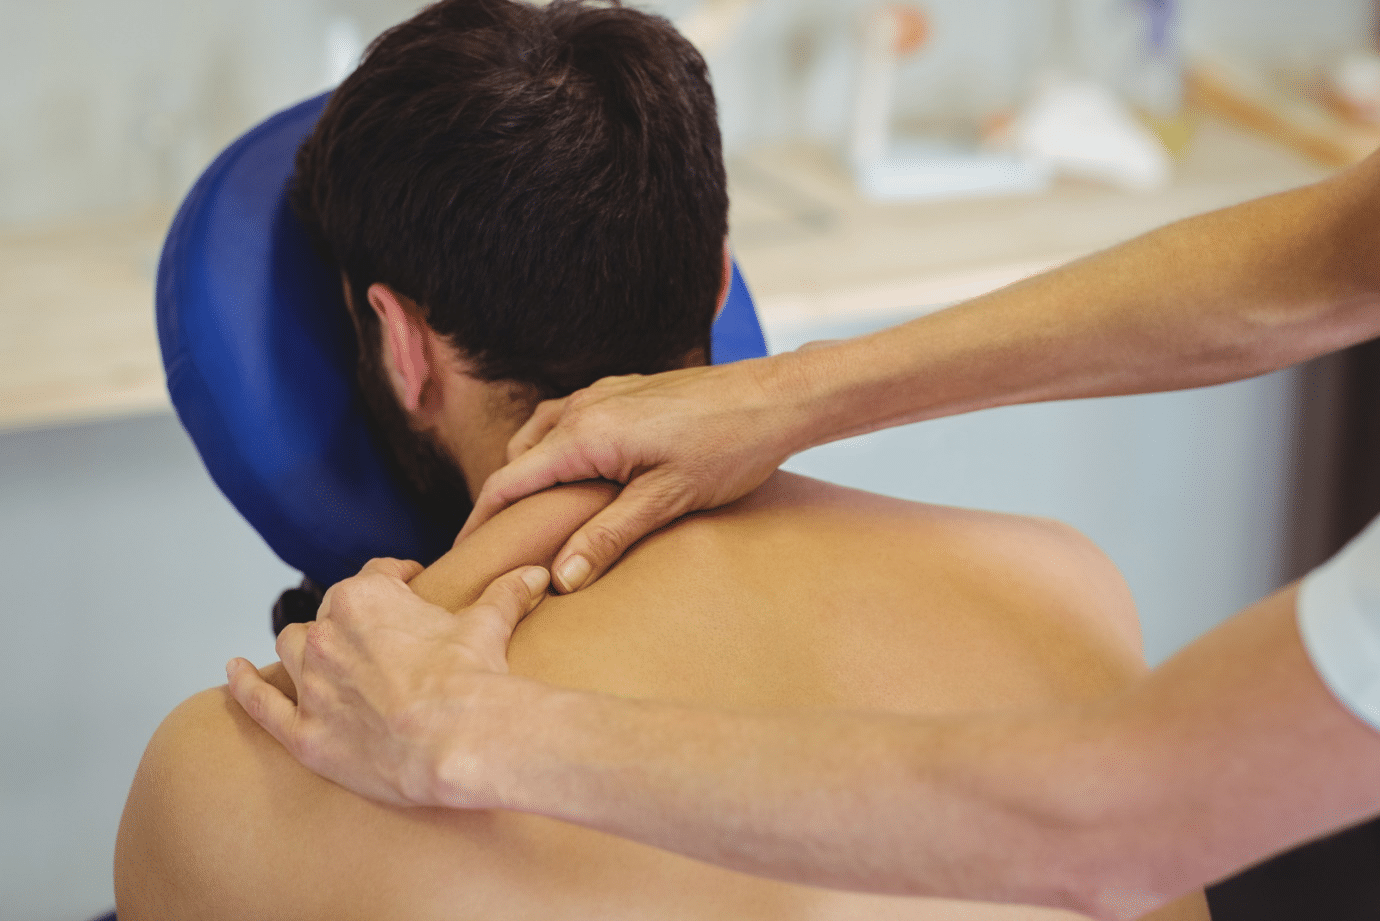 A person receiving massage PT as a treatment for musculoskeletal pain.